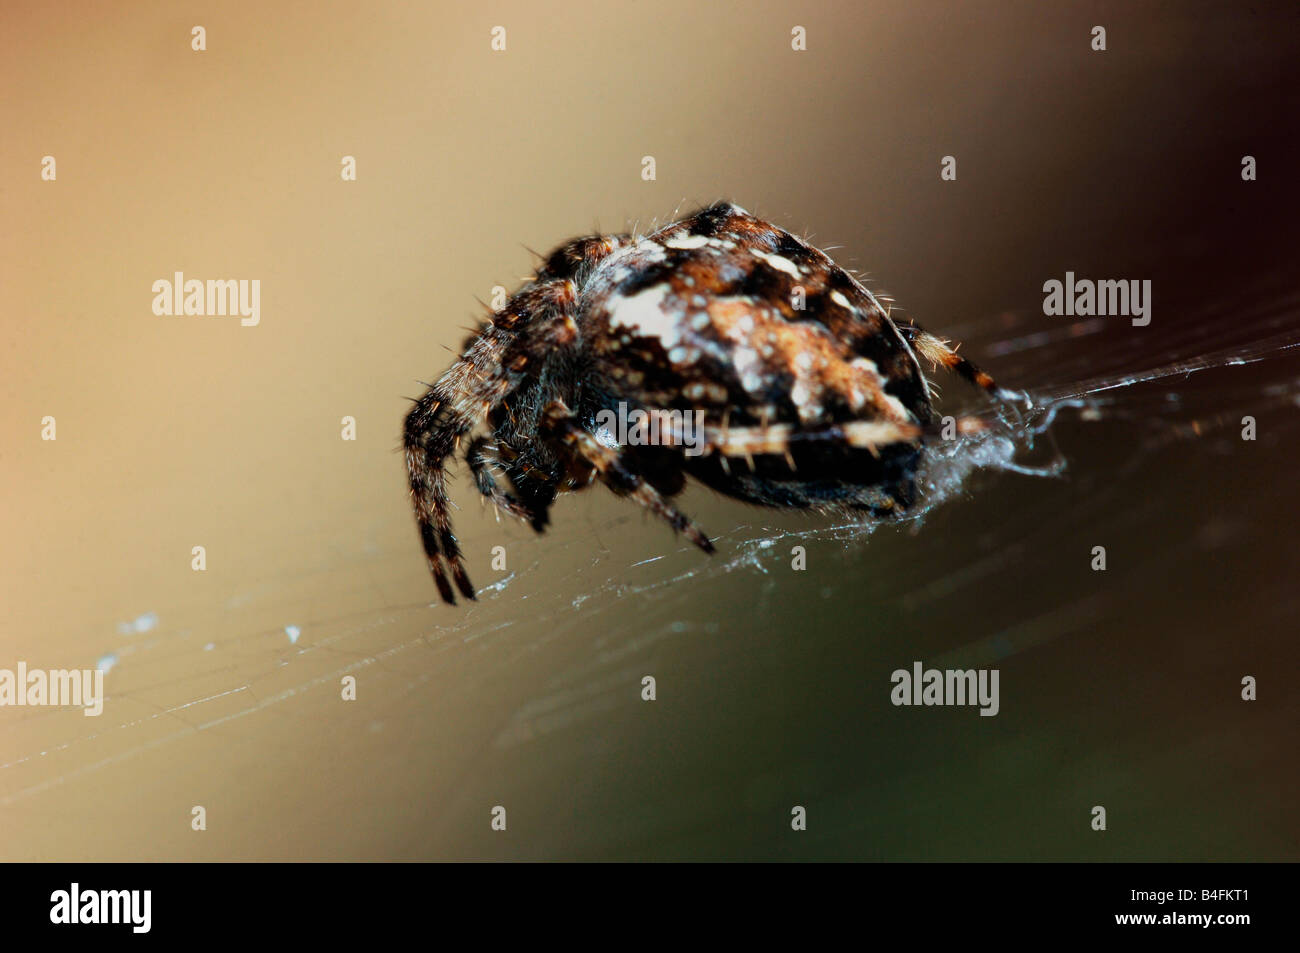 A Garden Spider (Araneus diadematus) On Its Web.Its Also Known As The Cross Spider. Stock Photo